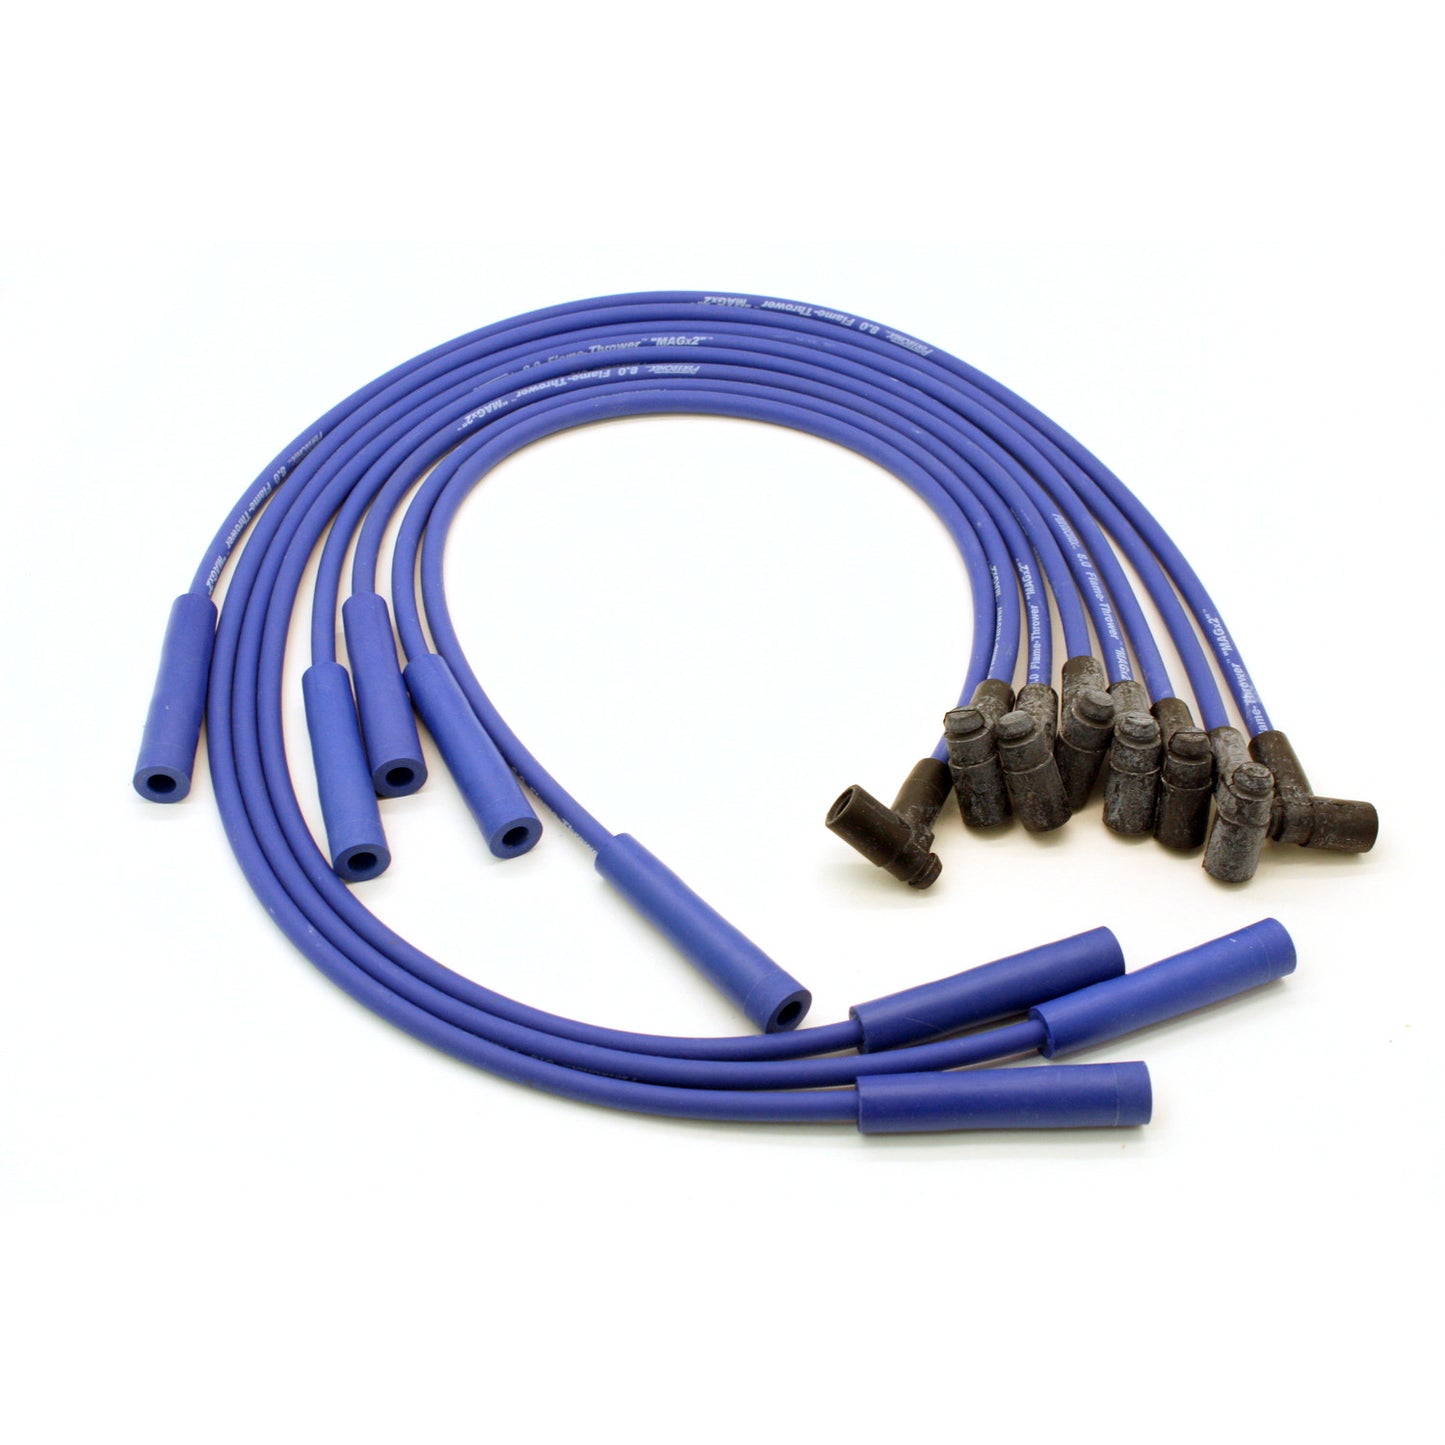 PerTronix 808305 Flame-Thrower Spark Plug Wires 8 cyl 8mm GM HEI Custom Fit Blue